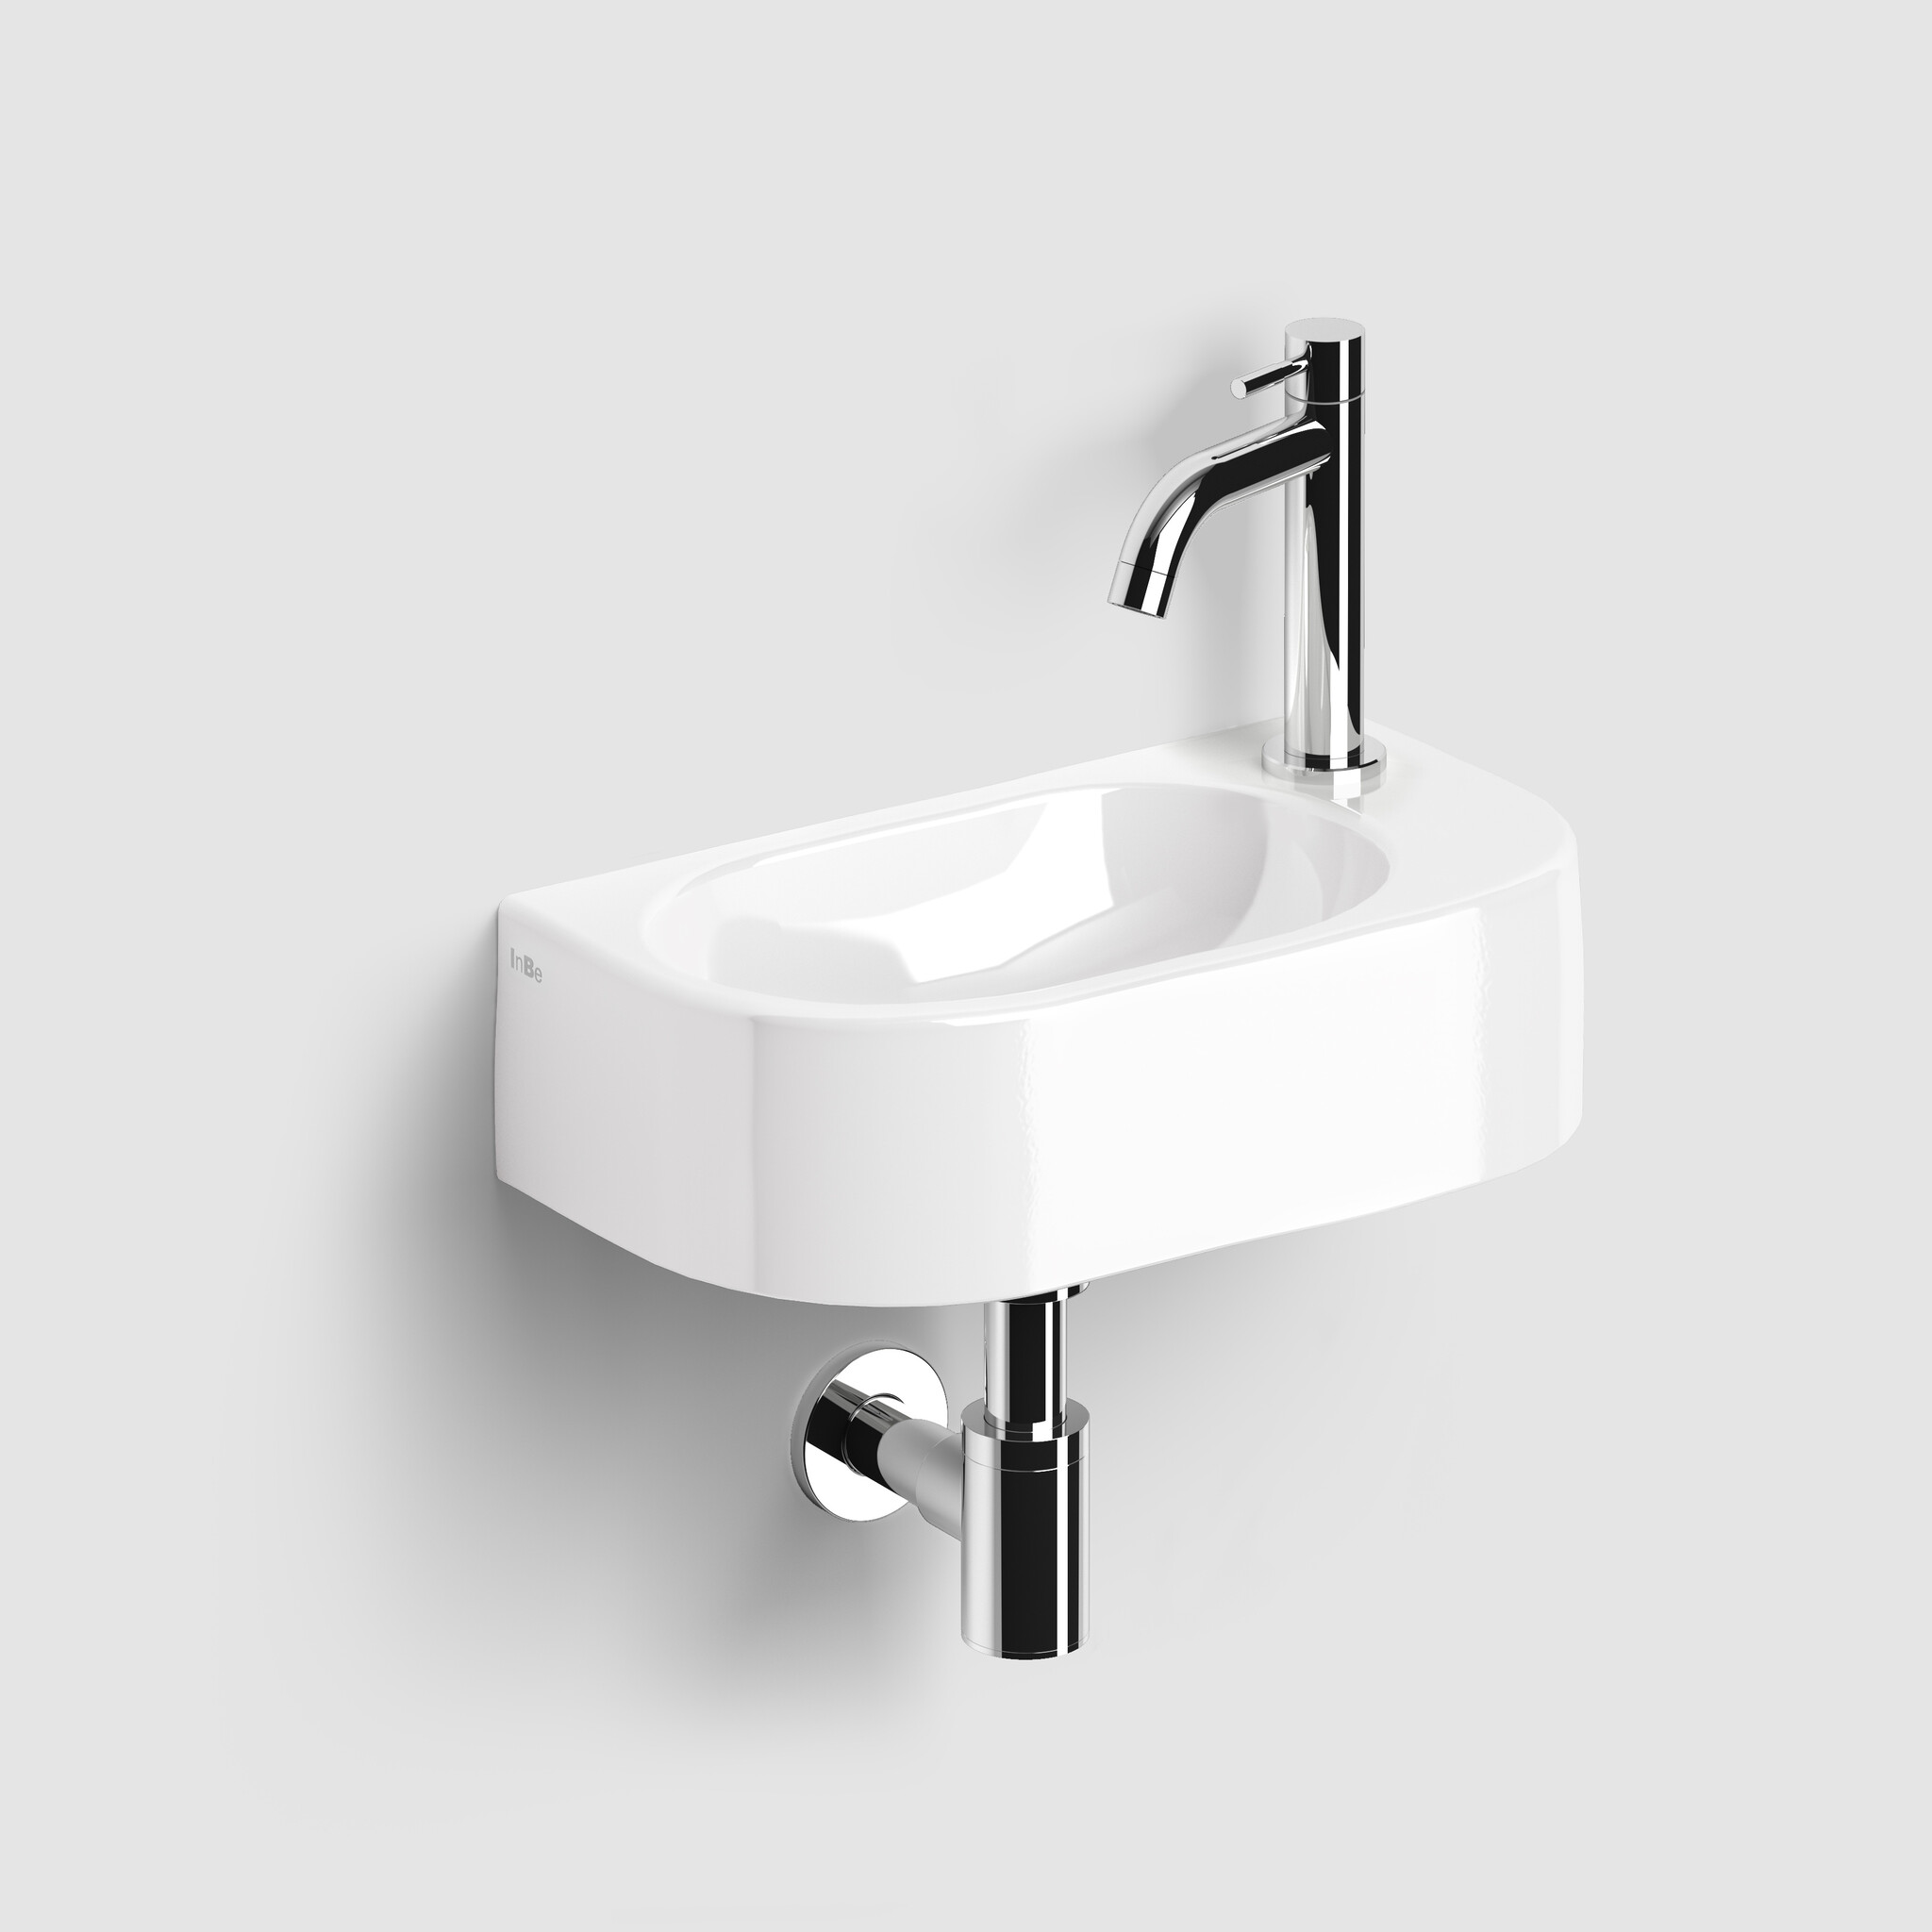 InBe InBe 7 handbasin, with taphole, without drain, white ceramic